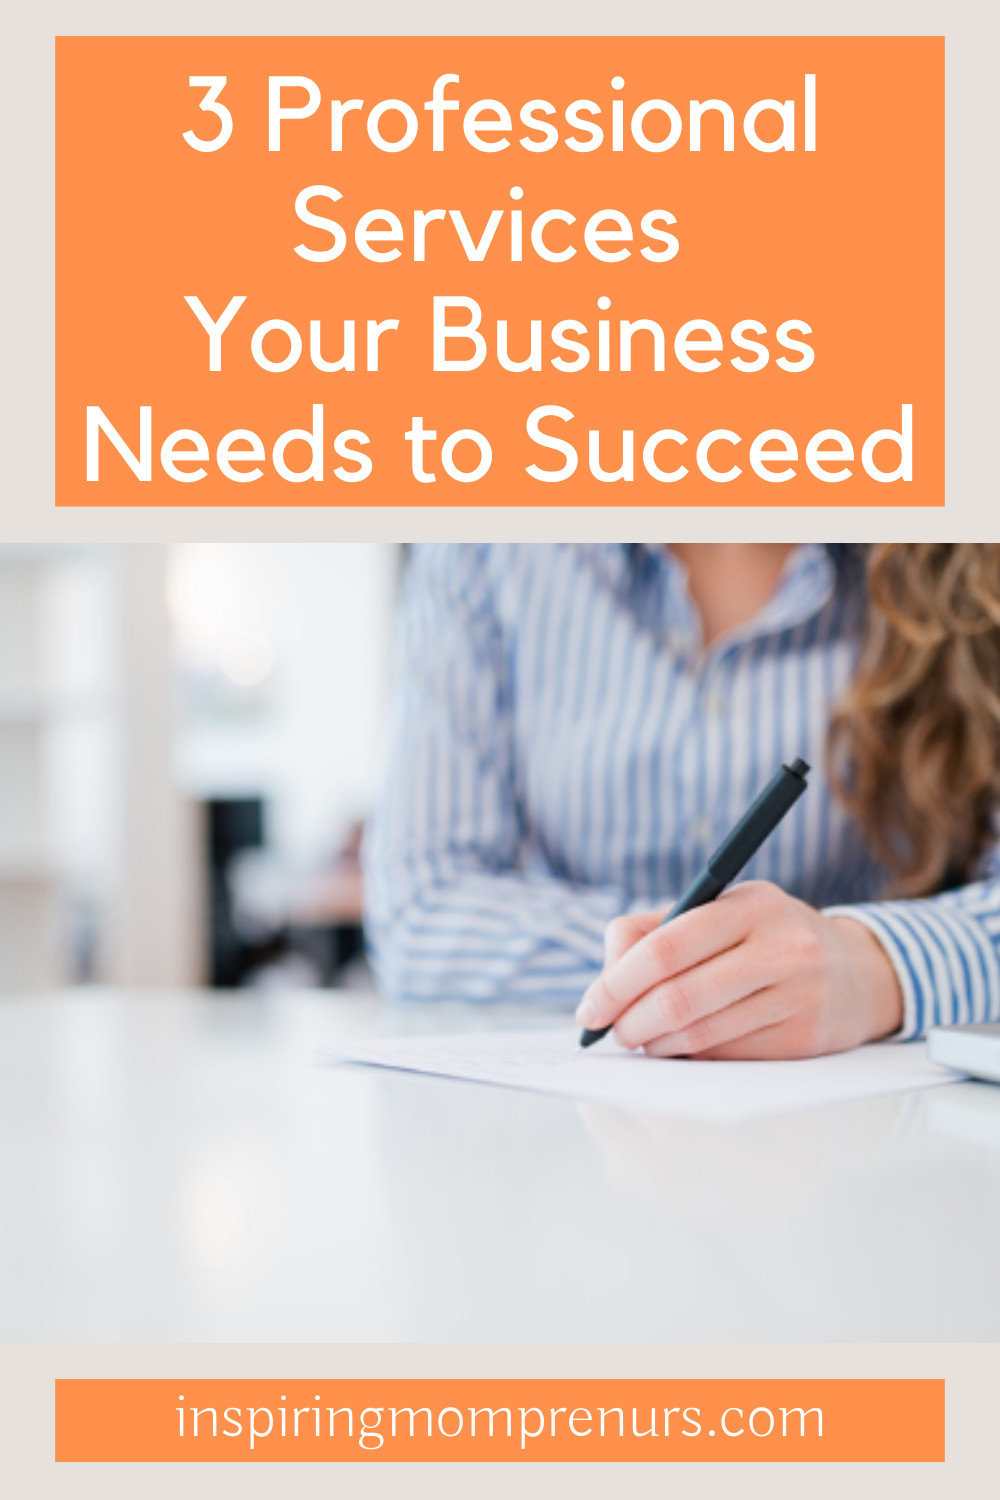 3 Professional Services Your Business Needs to Succeed